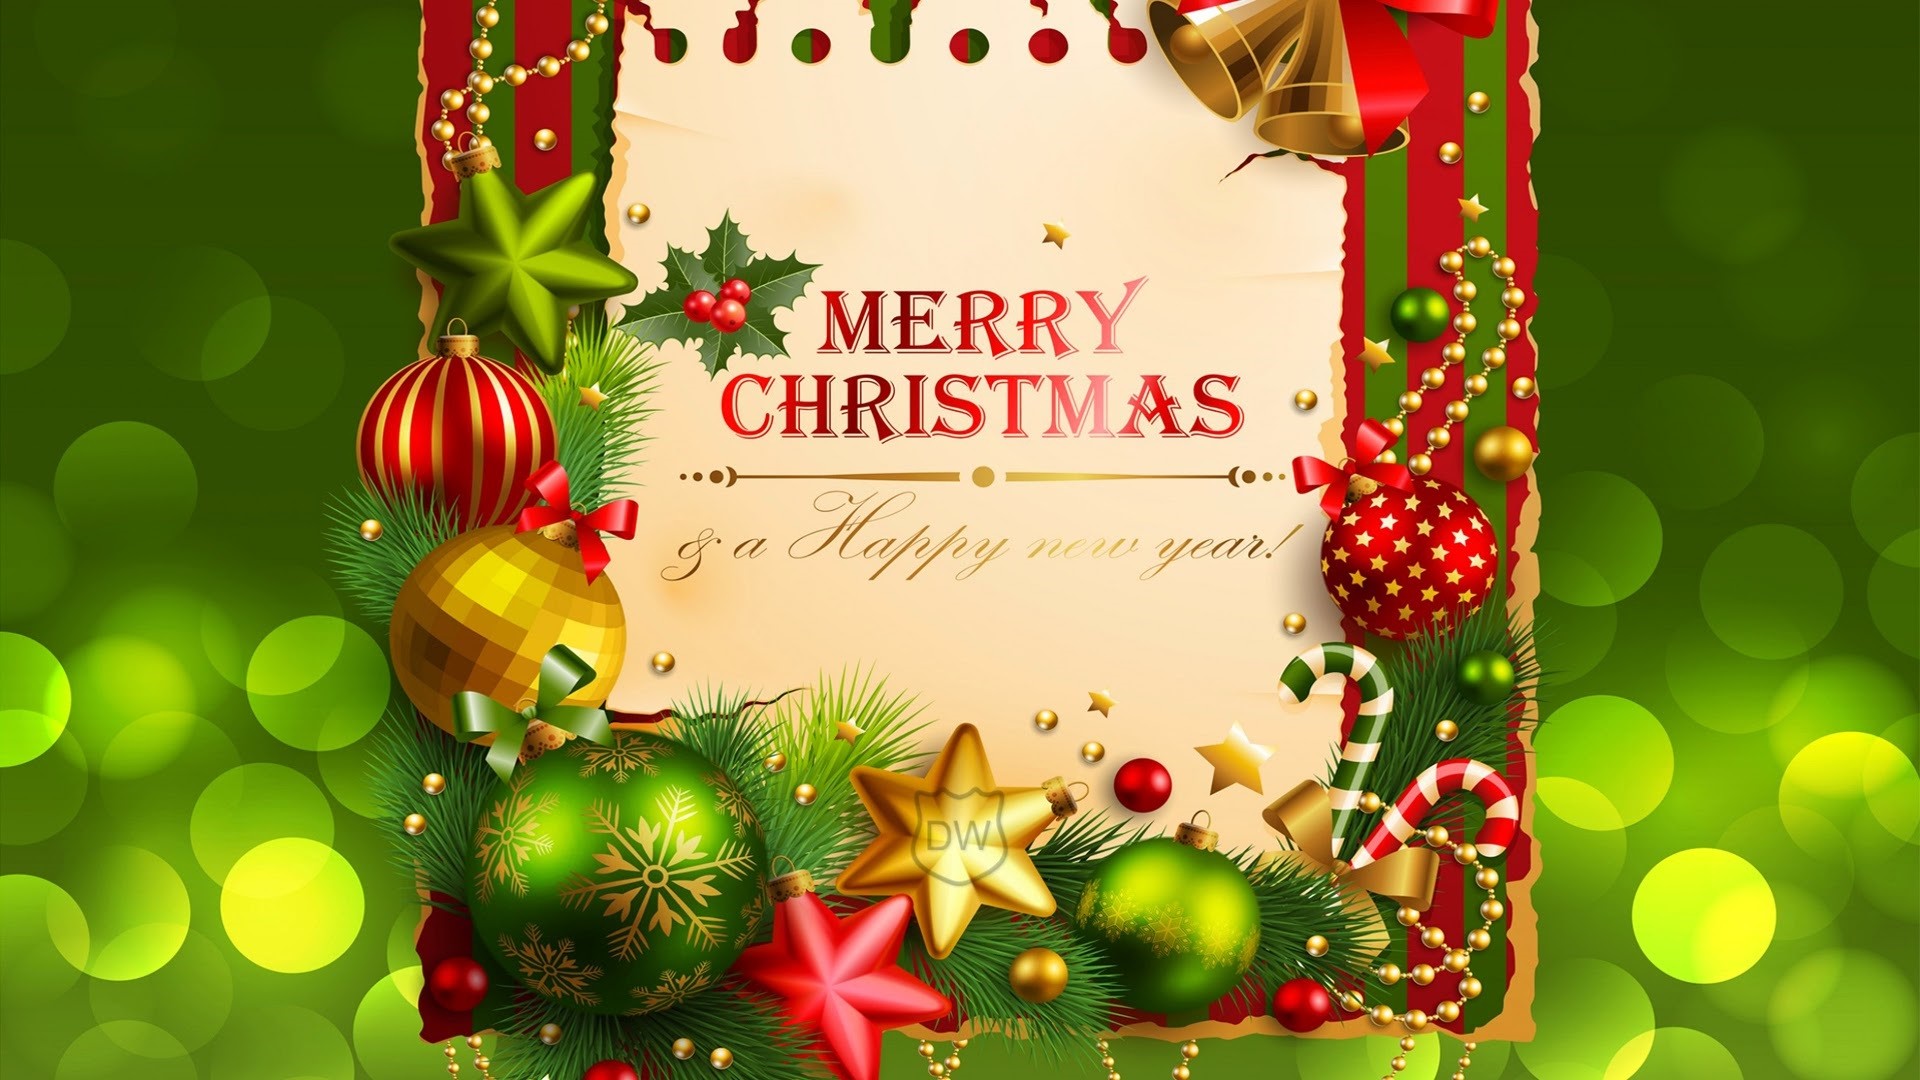 Merry-christmas-wallpaper-Beautiful15-collection-merry-christmas-and-